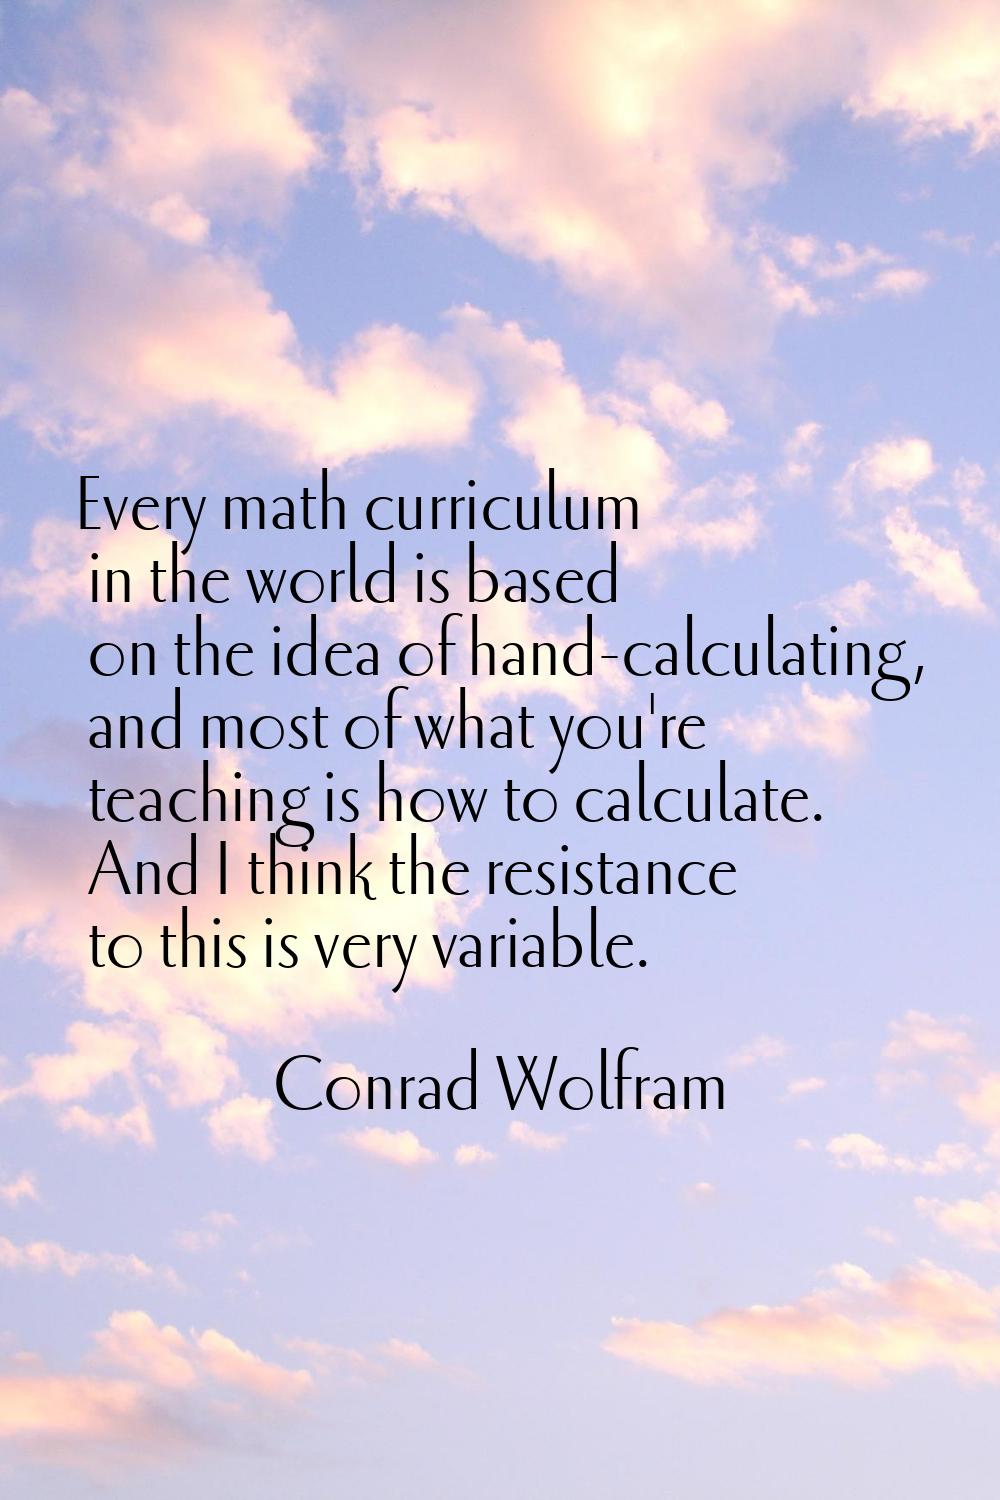 Every math curriculum in the world is based on the idea of hand-calculating, and most of what you'r